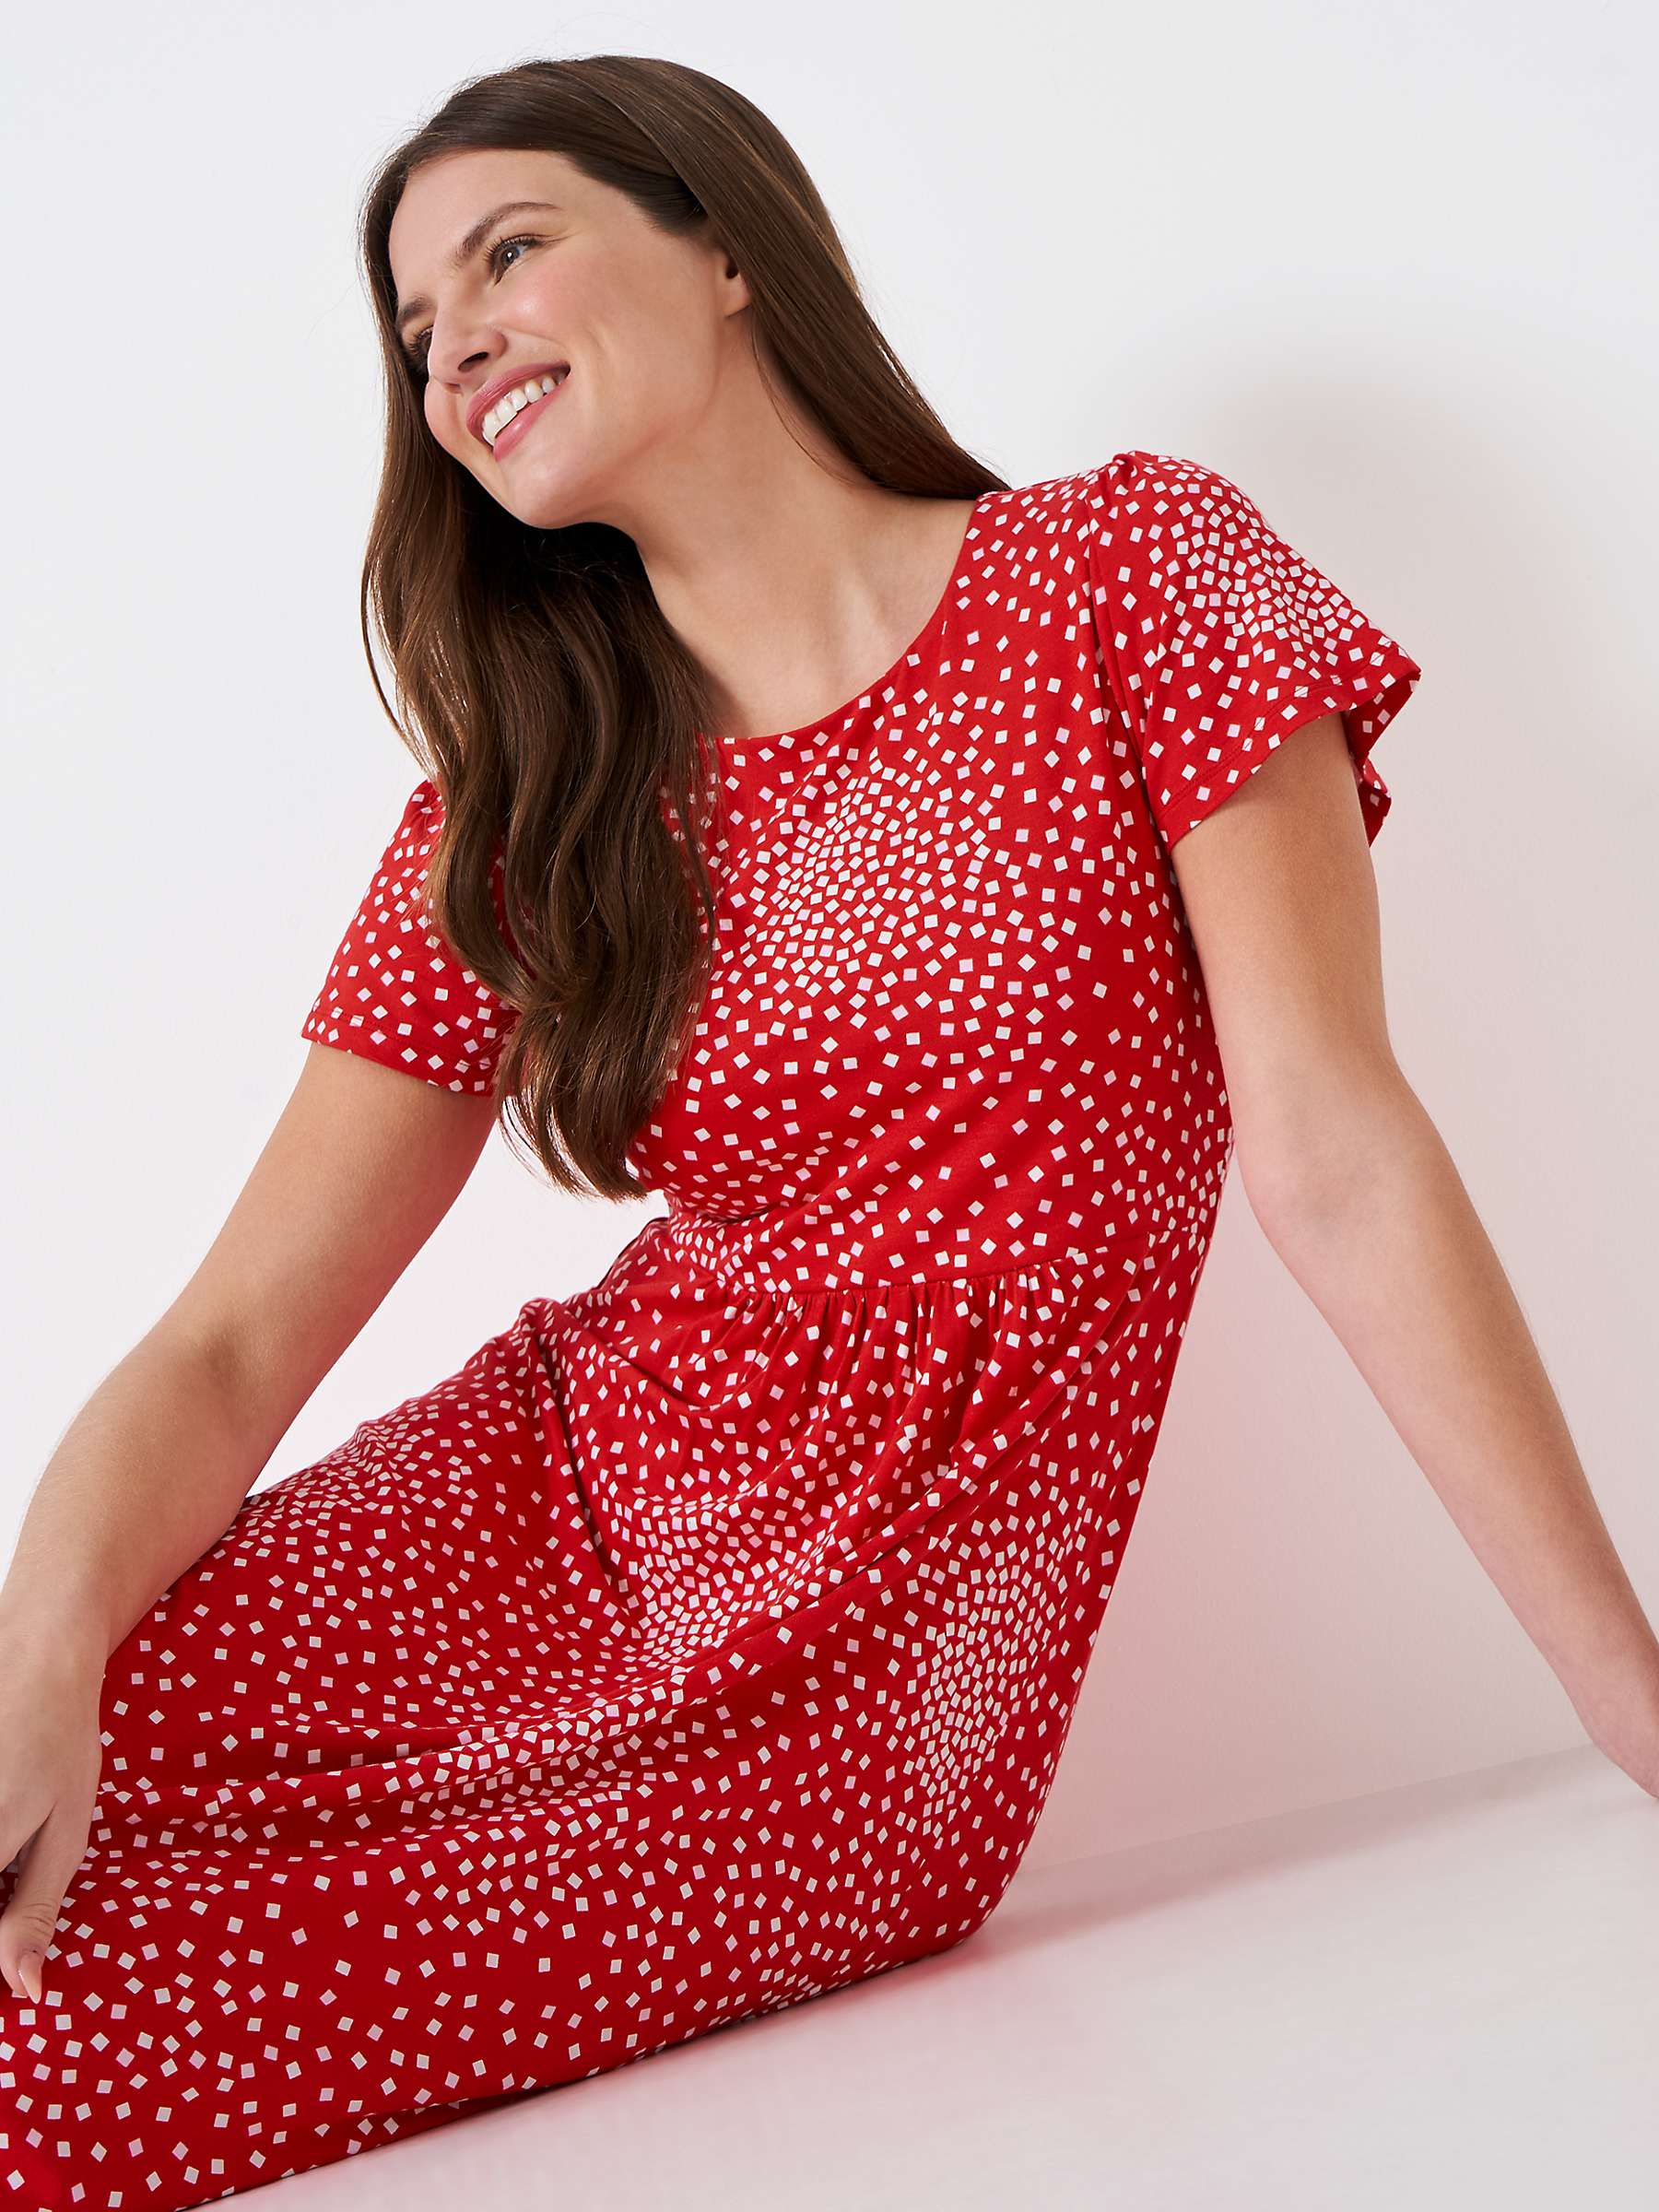 Buy Crew Clothing Jay Jersey Polka Dot Dress, Ruby Red Online at johnlewis.com